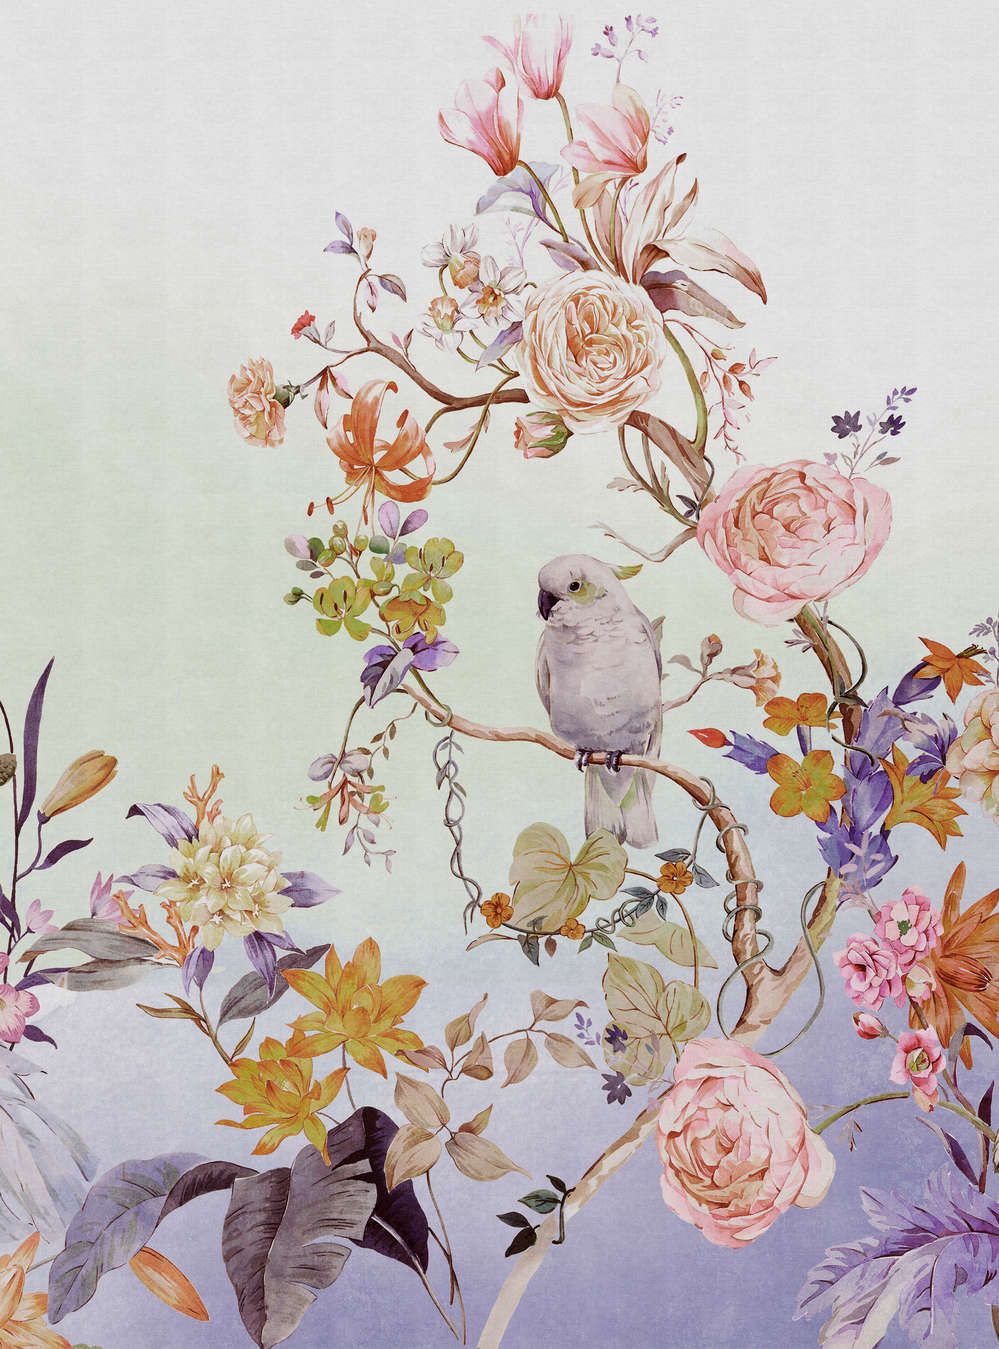             Photo wallpaper »paradise« - Bird & flowers with colour gradient and linen texture in the background - Colourful | Light textured non-woven
        